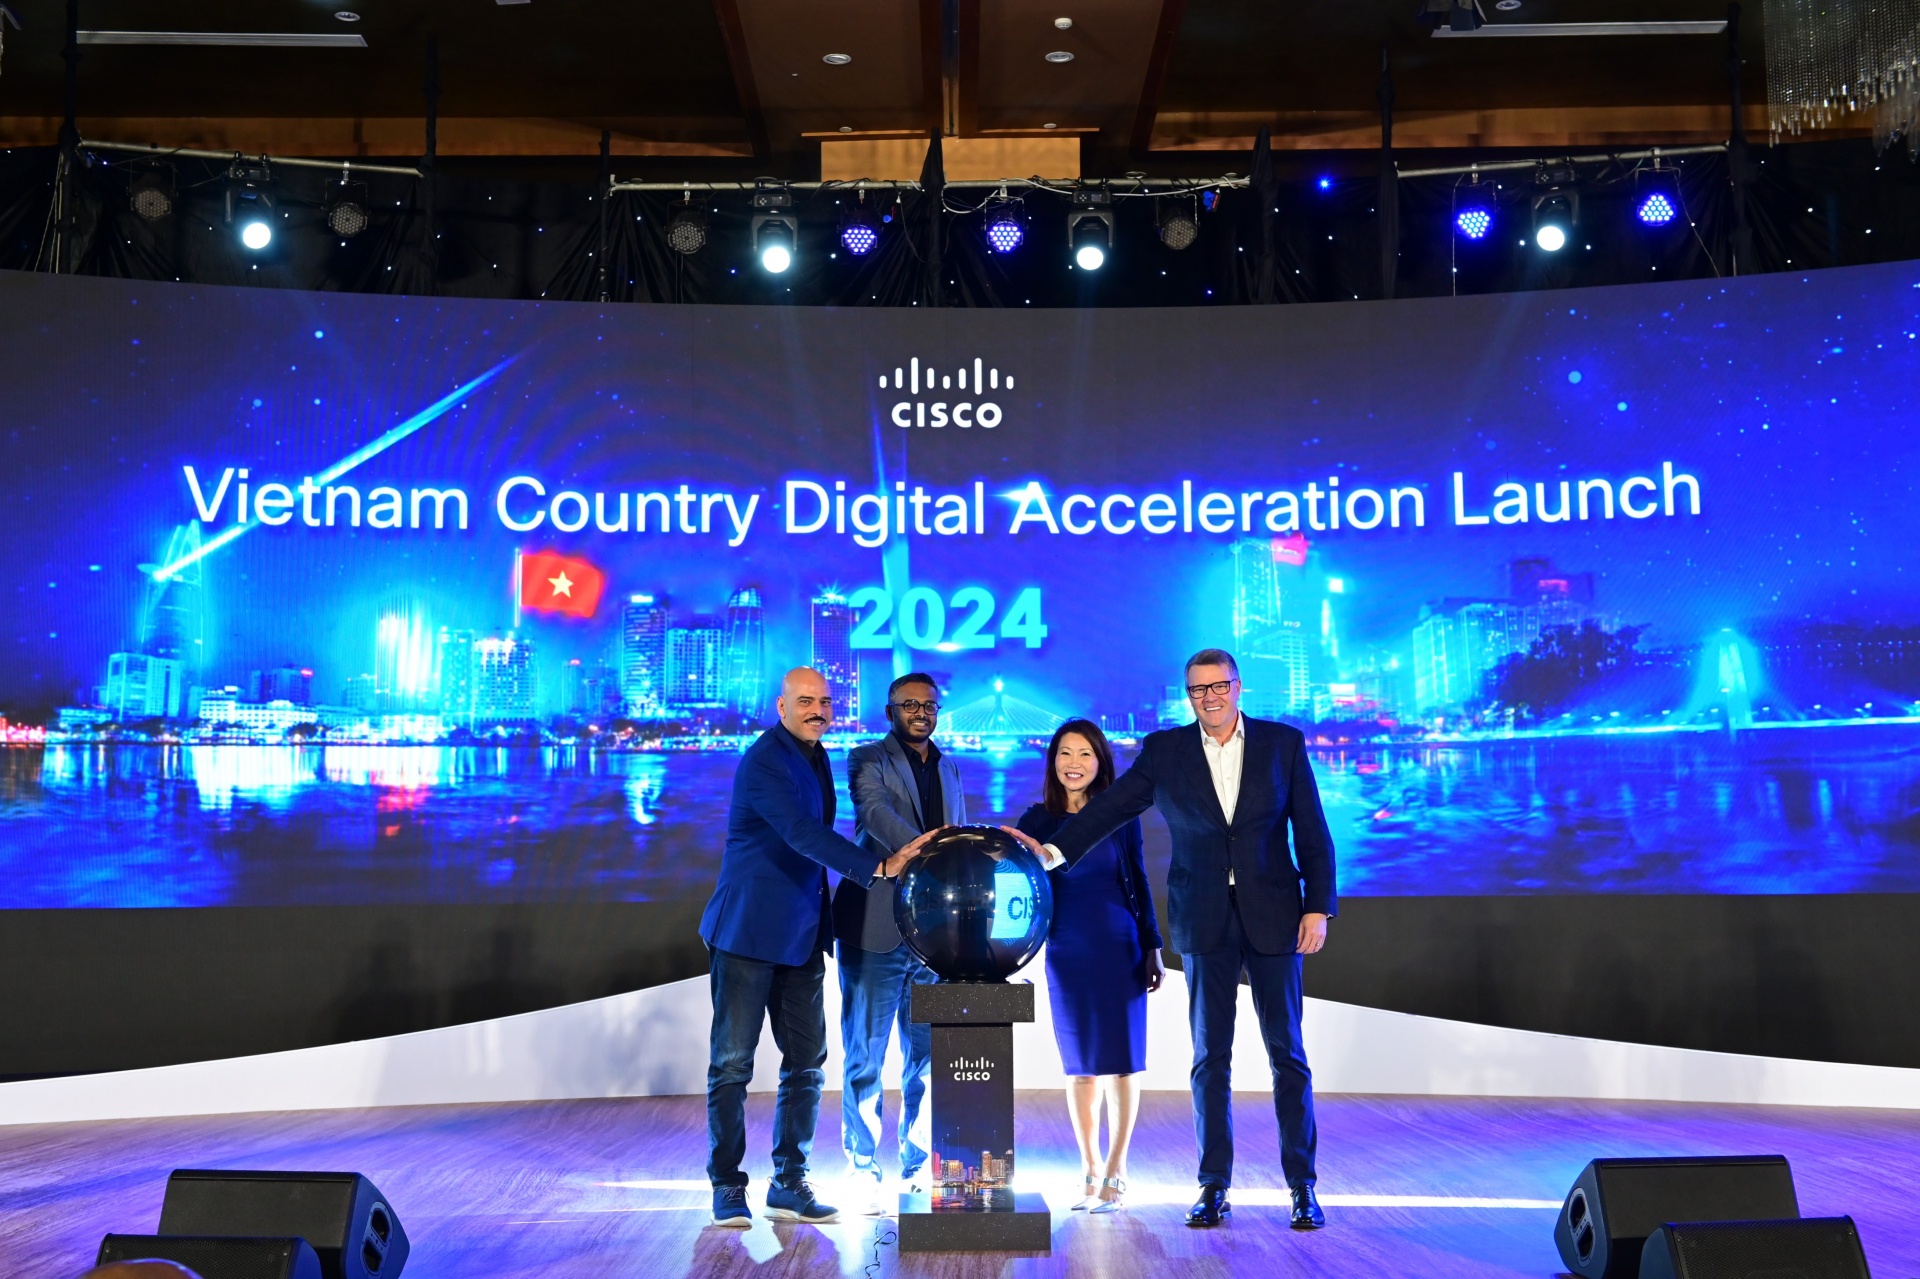 Cisco launches country digital acceleration programme in Vietnam (PR)